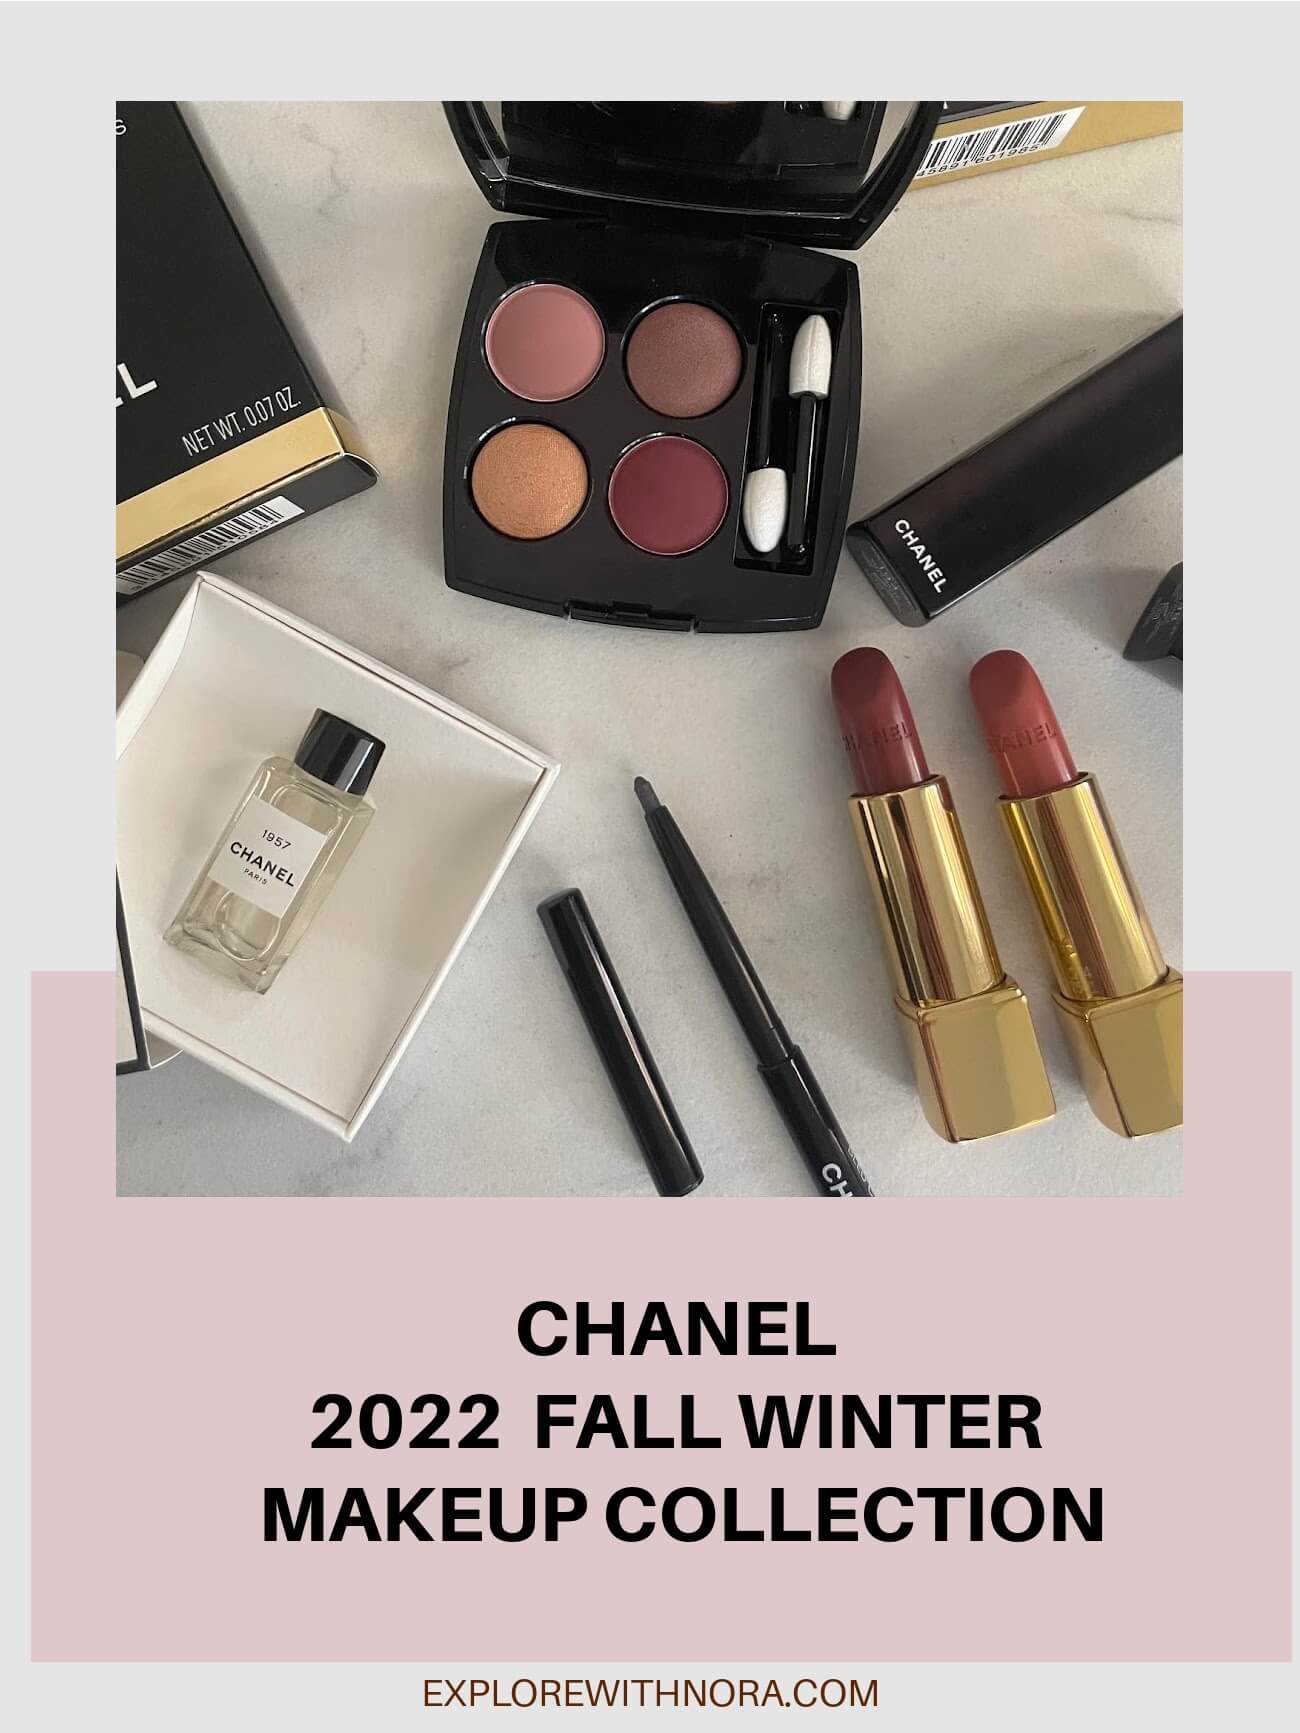 CHANEL 2022 Fall Winter Makeup Collection Explore with Nora